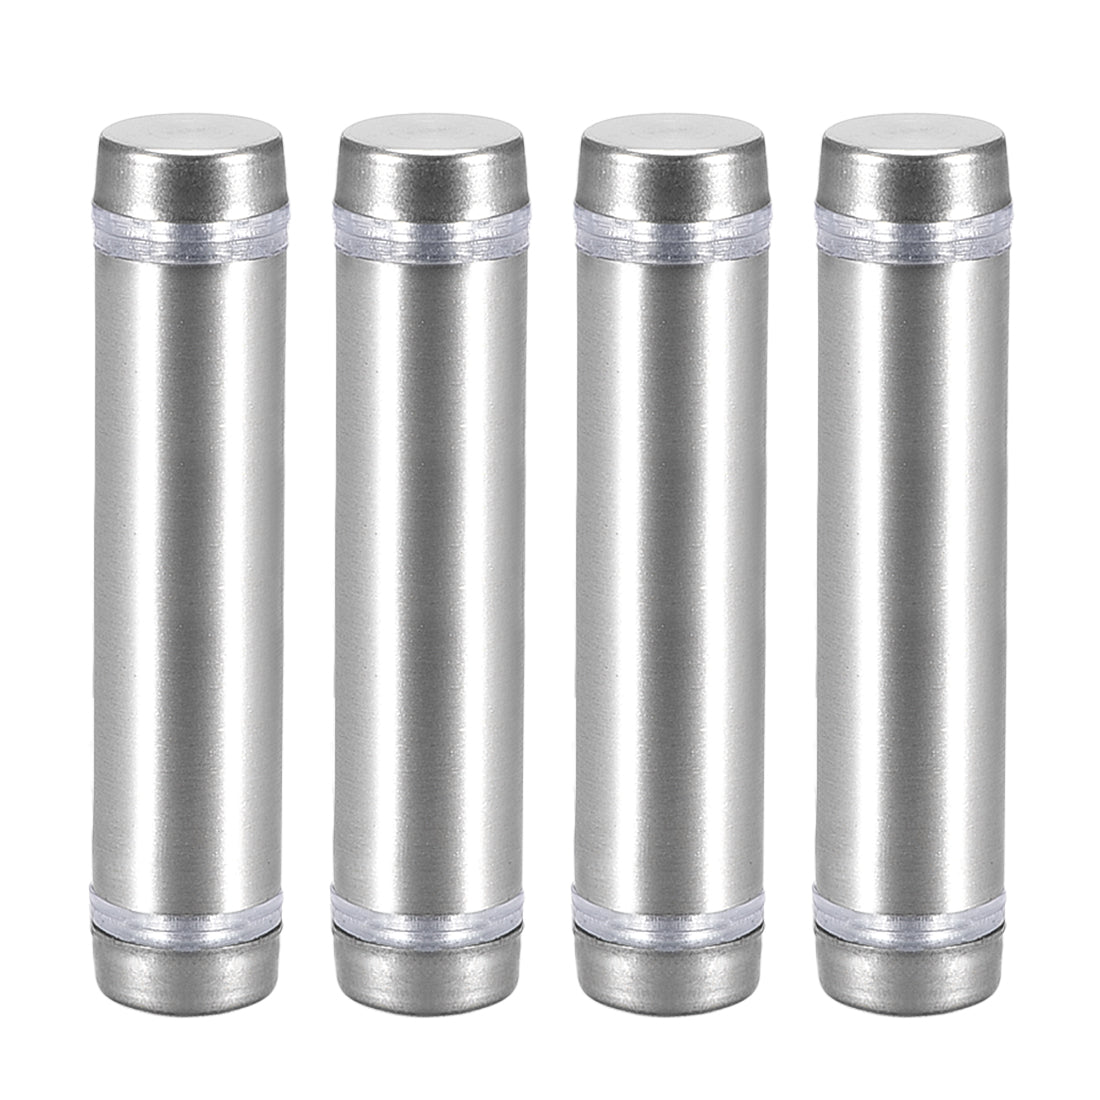 uxcell Uxcell Glass Standoff Double Head Stainless Steel Standoff Holder 12mm x 54mm 4 Pcs